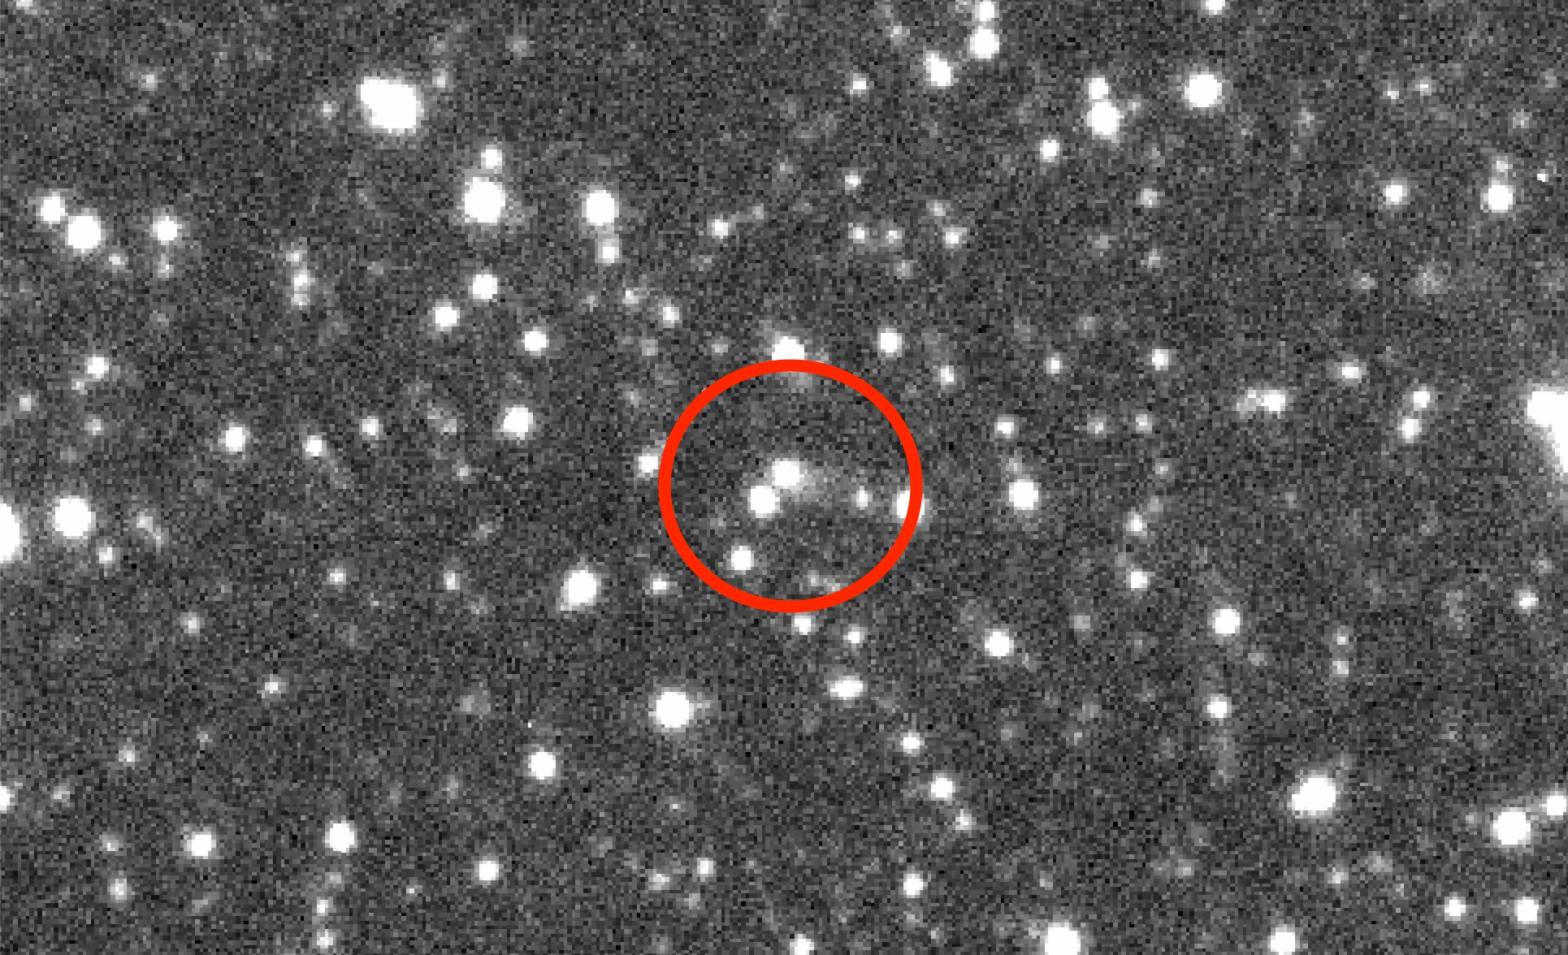 The newly re-designated Comet P/2019 LD2 (ATLAS) as observed on June 11, 2019, using the Las Cumbres Observatory Global Telescope (LCOGT) Network in Chile. (Image: JD Armstrong/IfA/LCOGT)